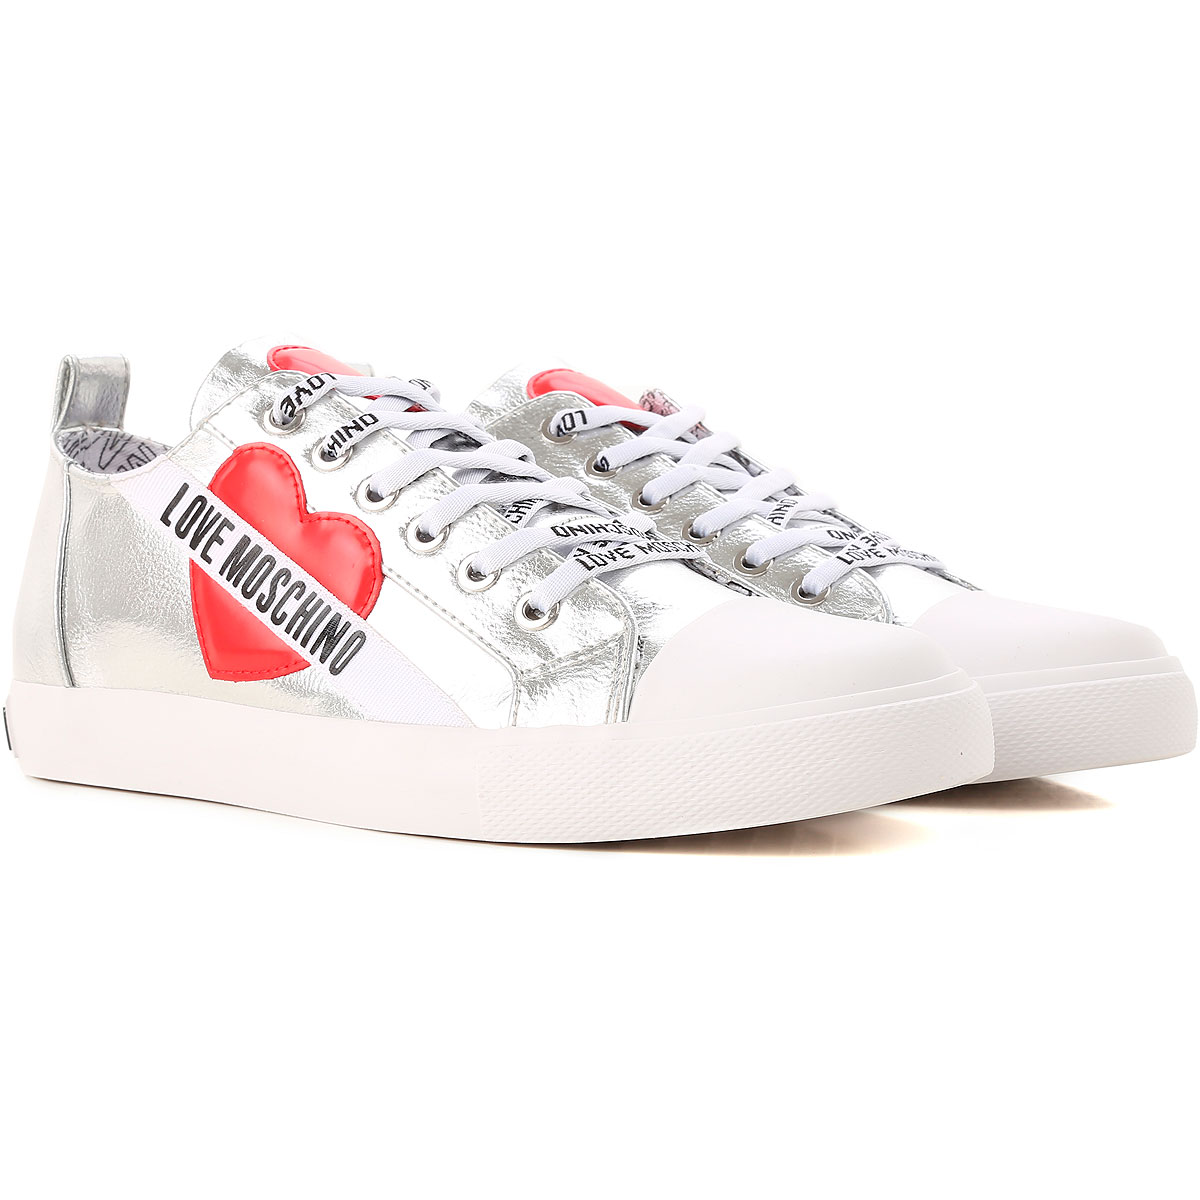 moschino sneakers 2018